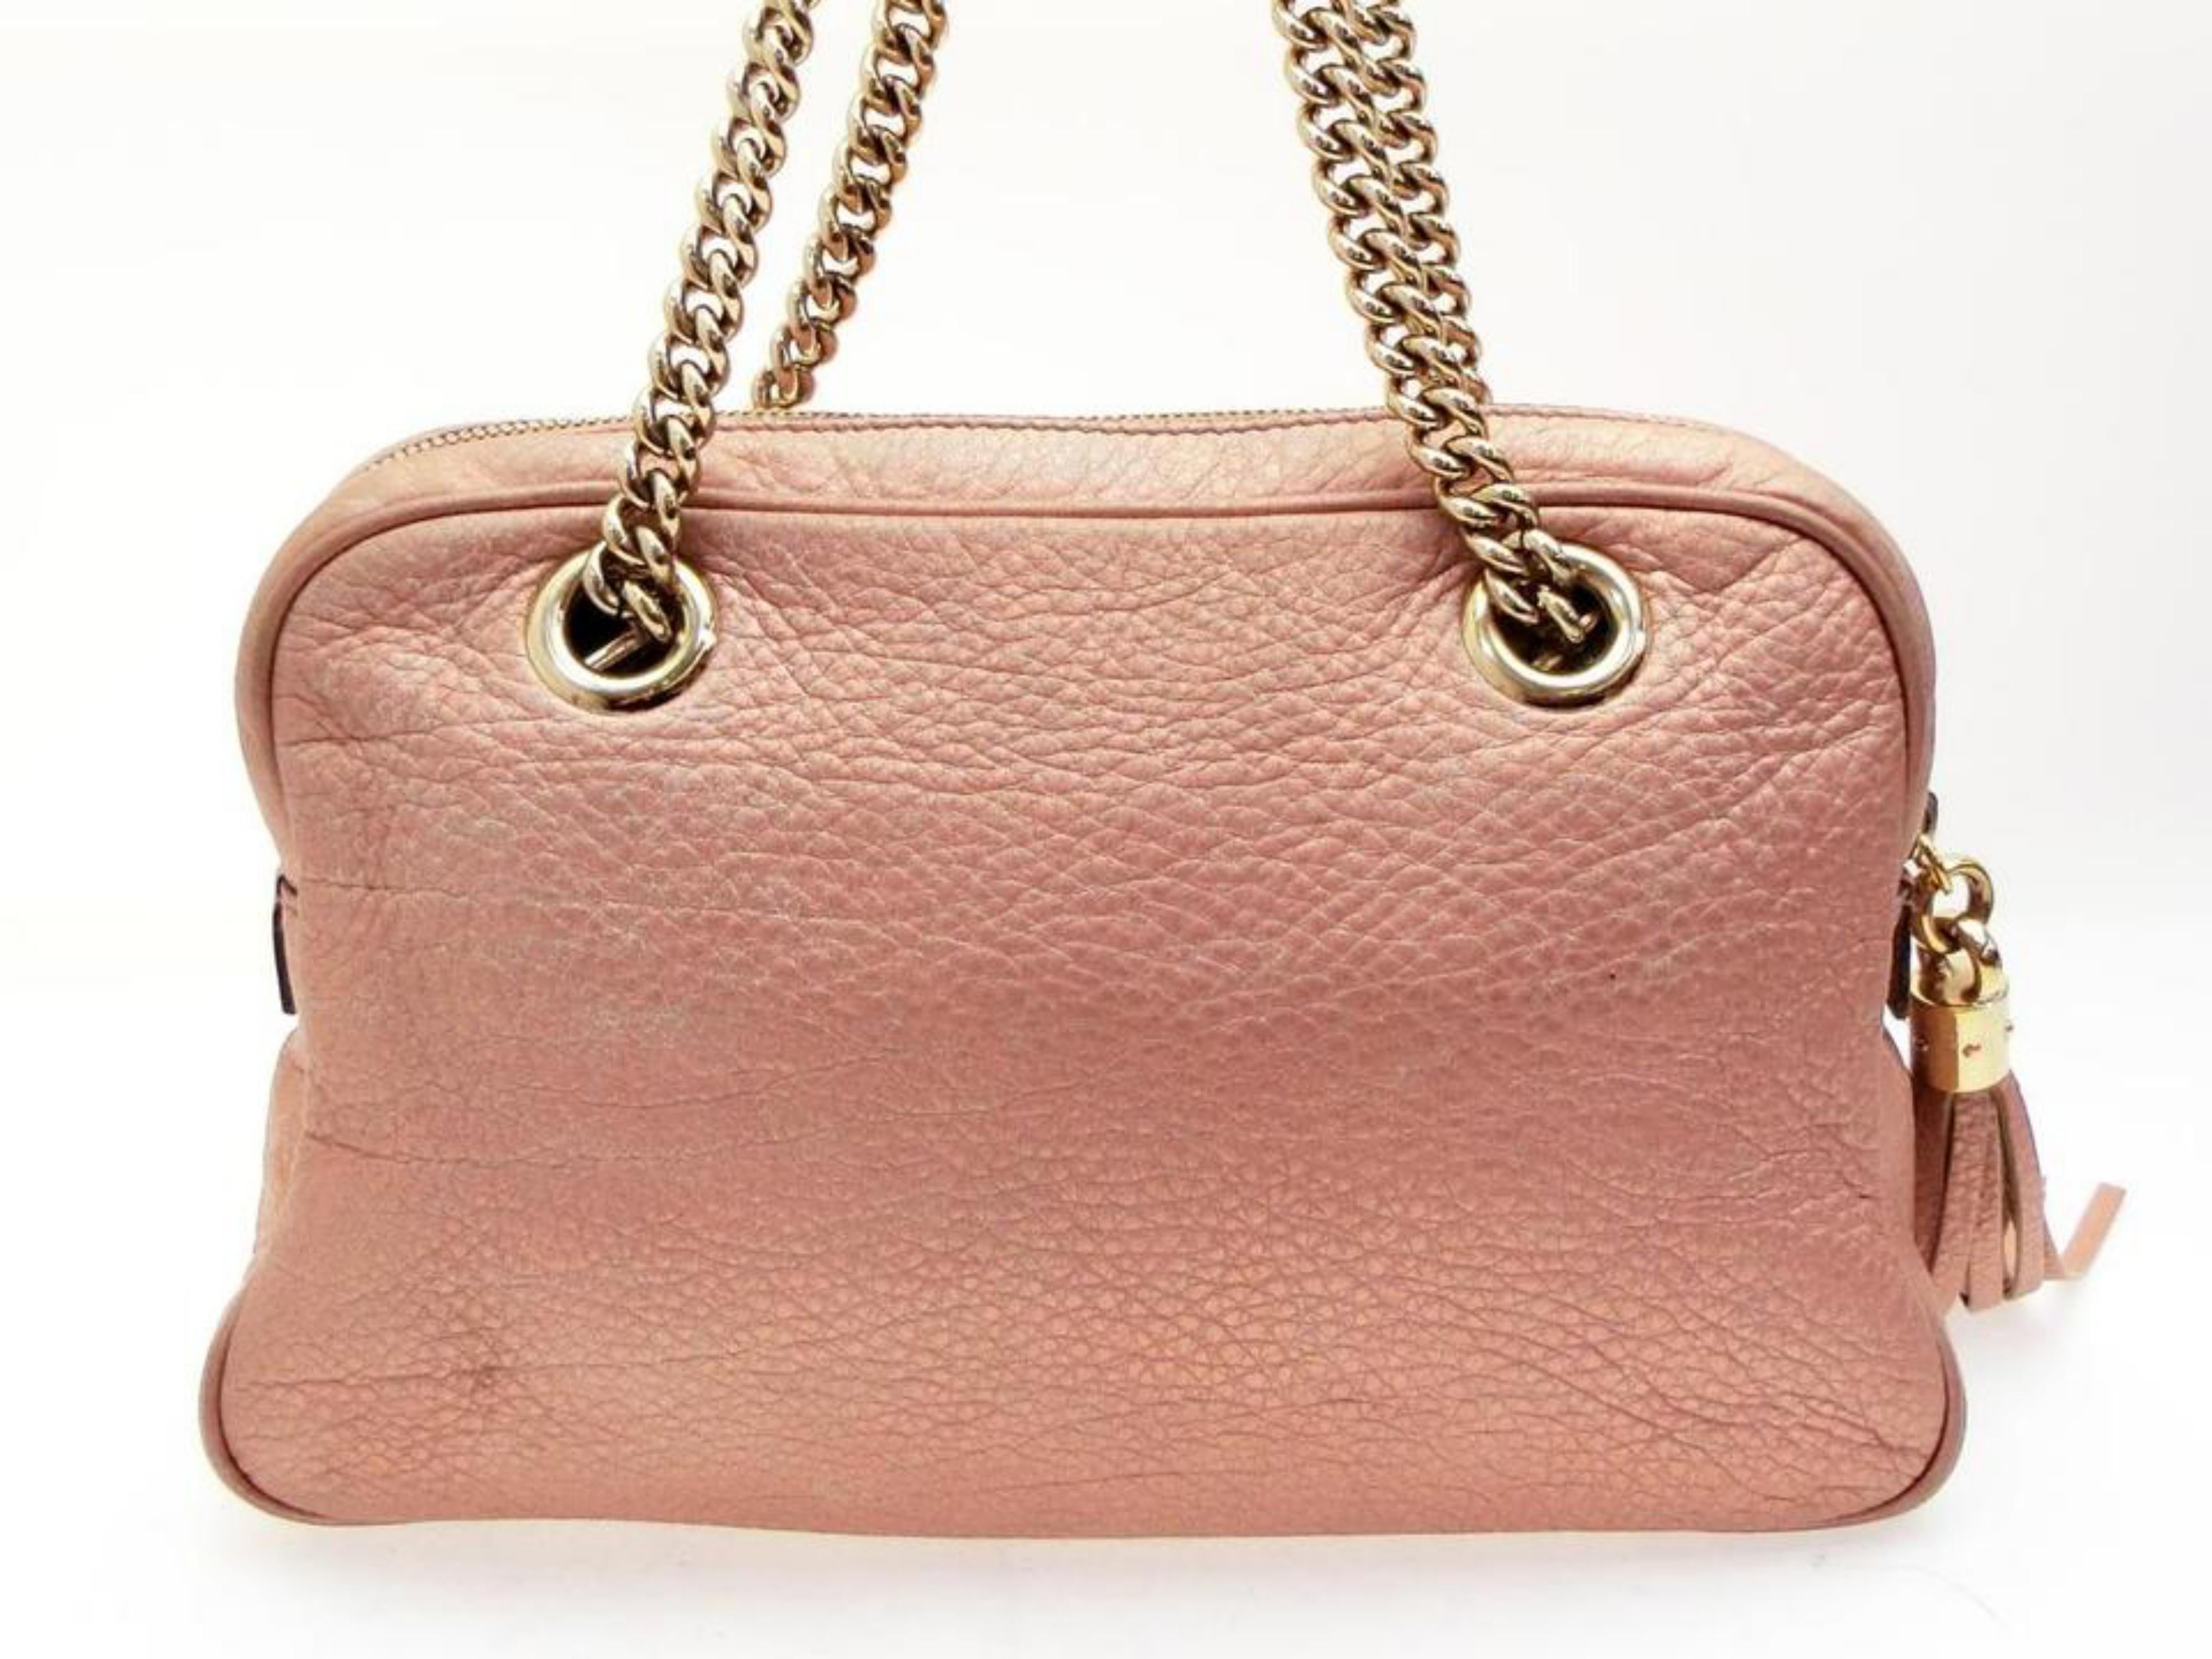 Gucci Soho (Ultra Rare) Chain Camera 227986 Pink Leather Shoulder Bag For Sale 2